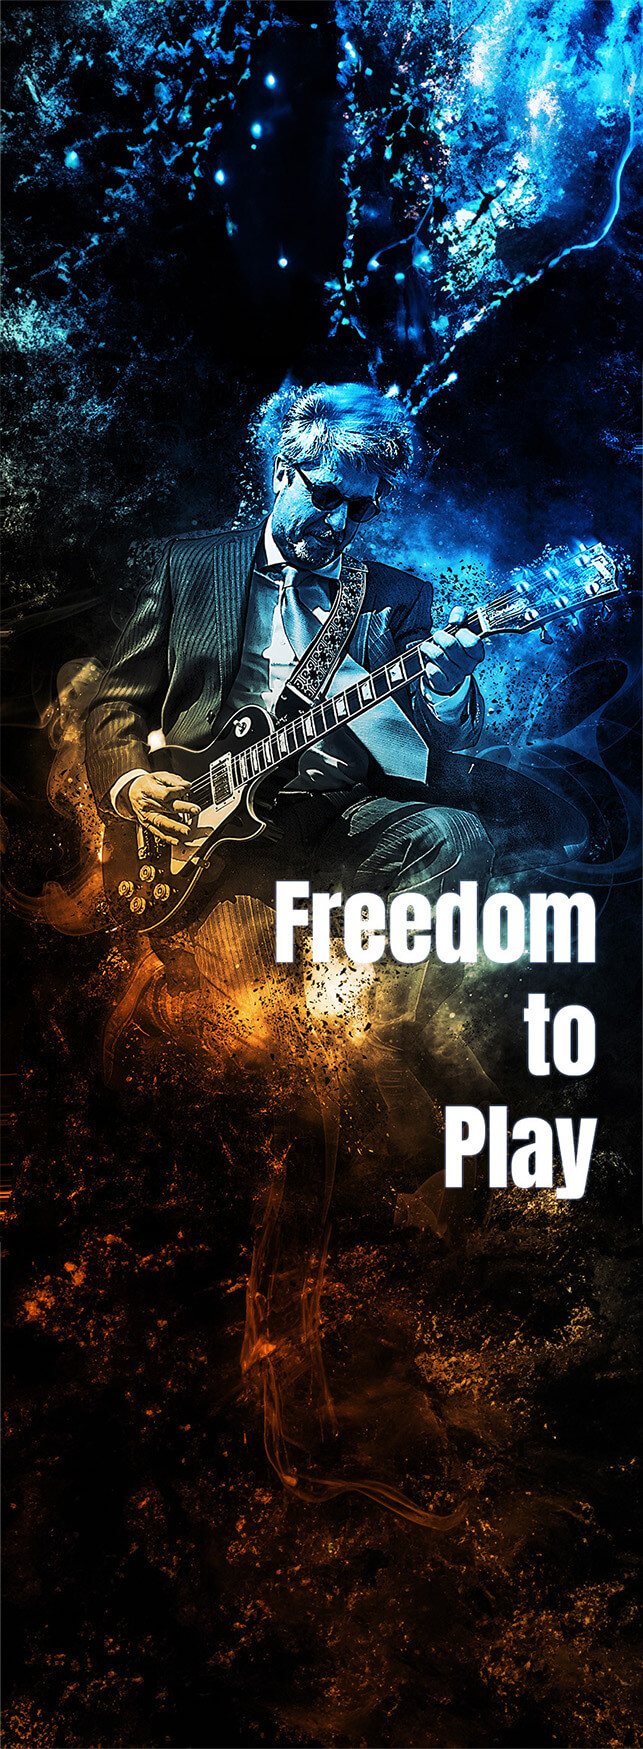 Image of guitarist set free to play what he feels.